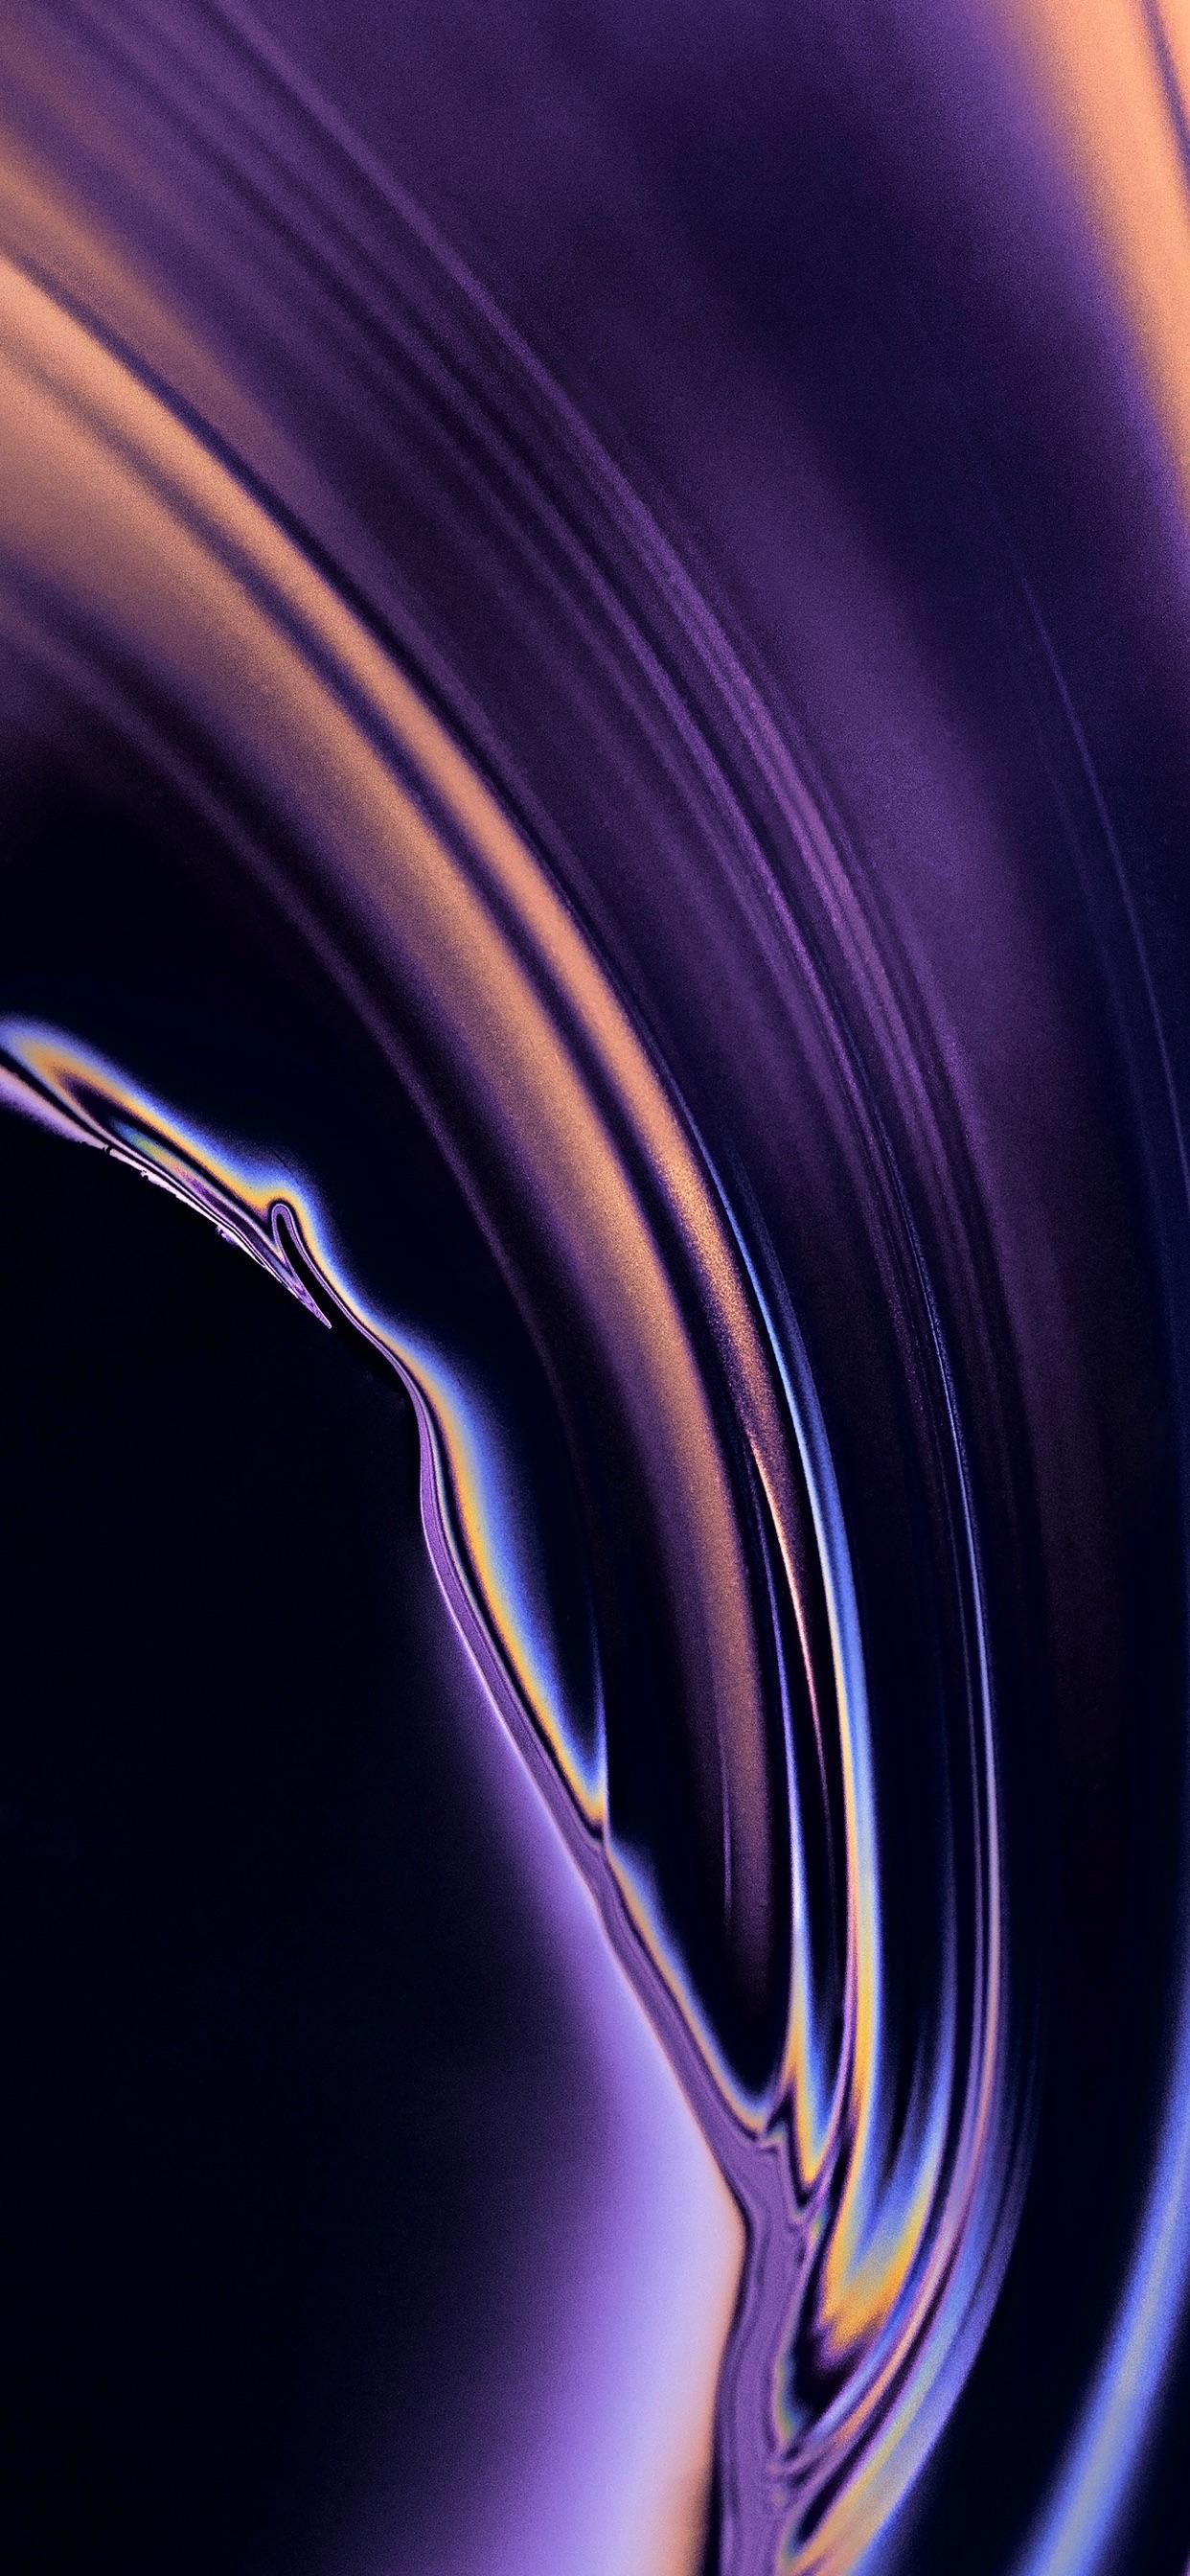 Wallpaper Weekends: Abstract iPhone Wallpaper From the macOS